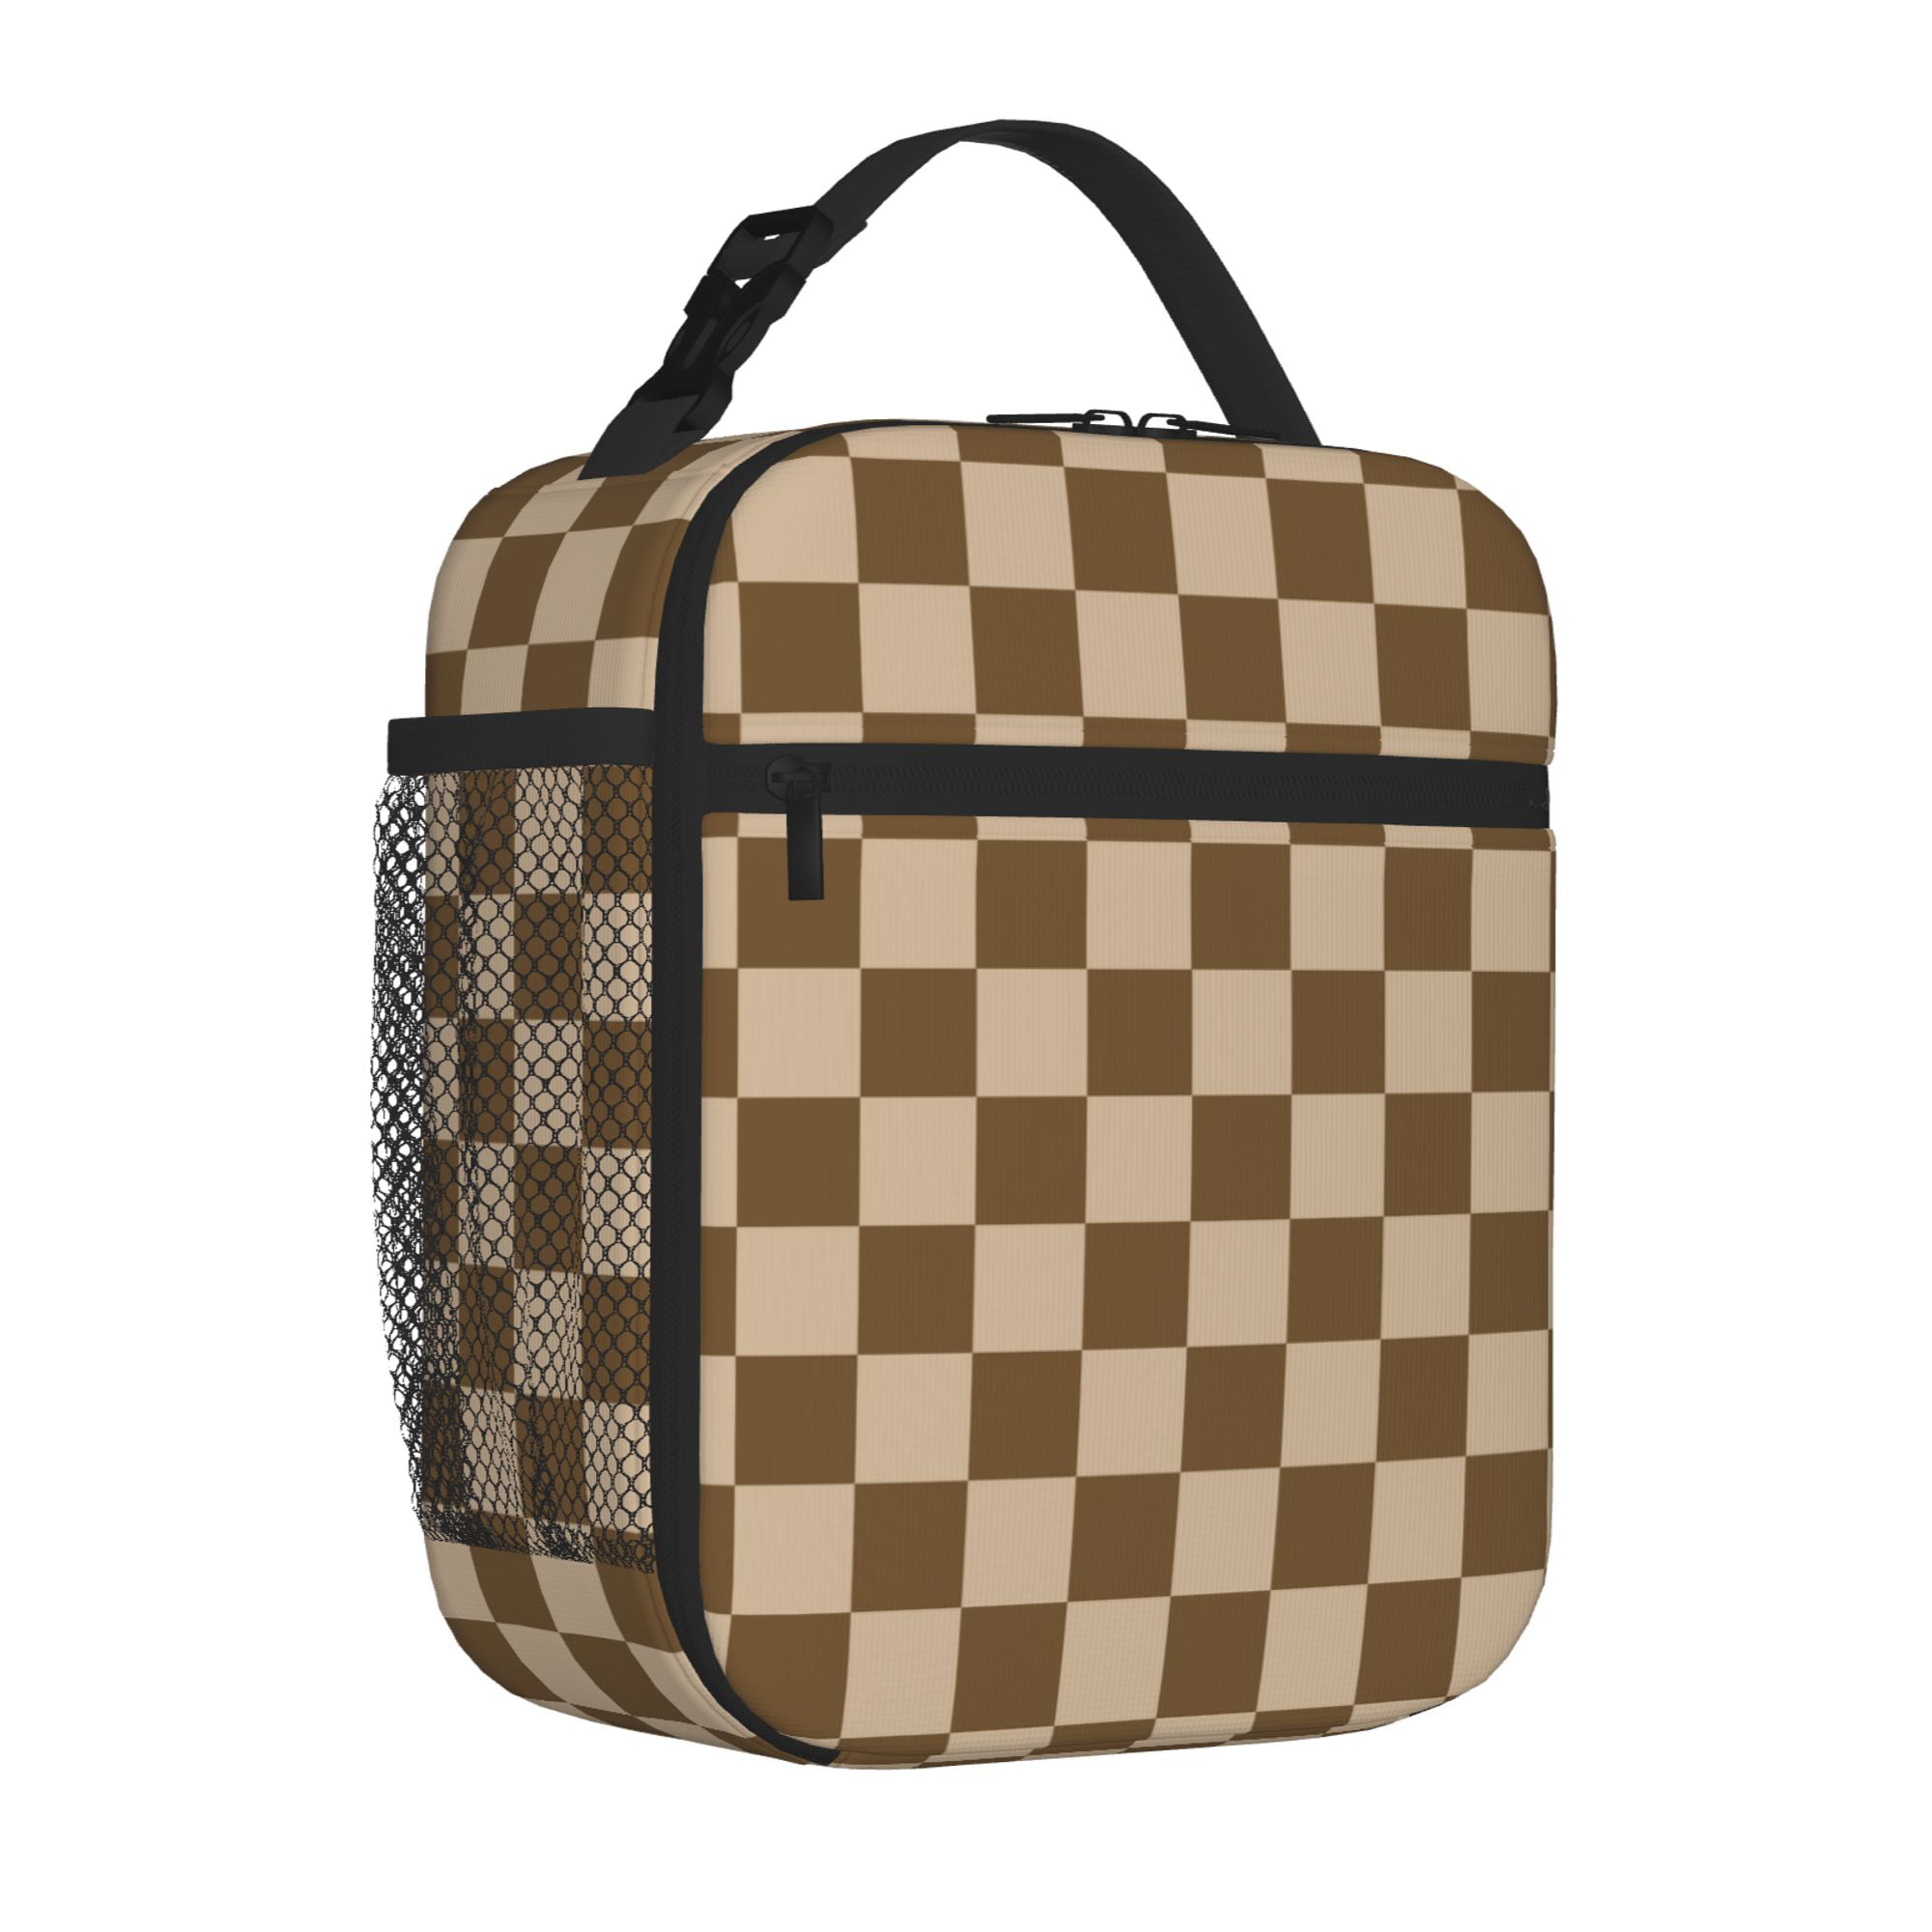  Checkered Lunch Box for Women Men Plaid Check Pattern Soft  Insulated Lunch Bag with Handle Freezable Lunch Cooler Reusable Lunch Tote  Bag for Office Work Sports Beach Picnic Travel: Home 